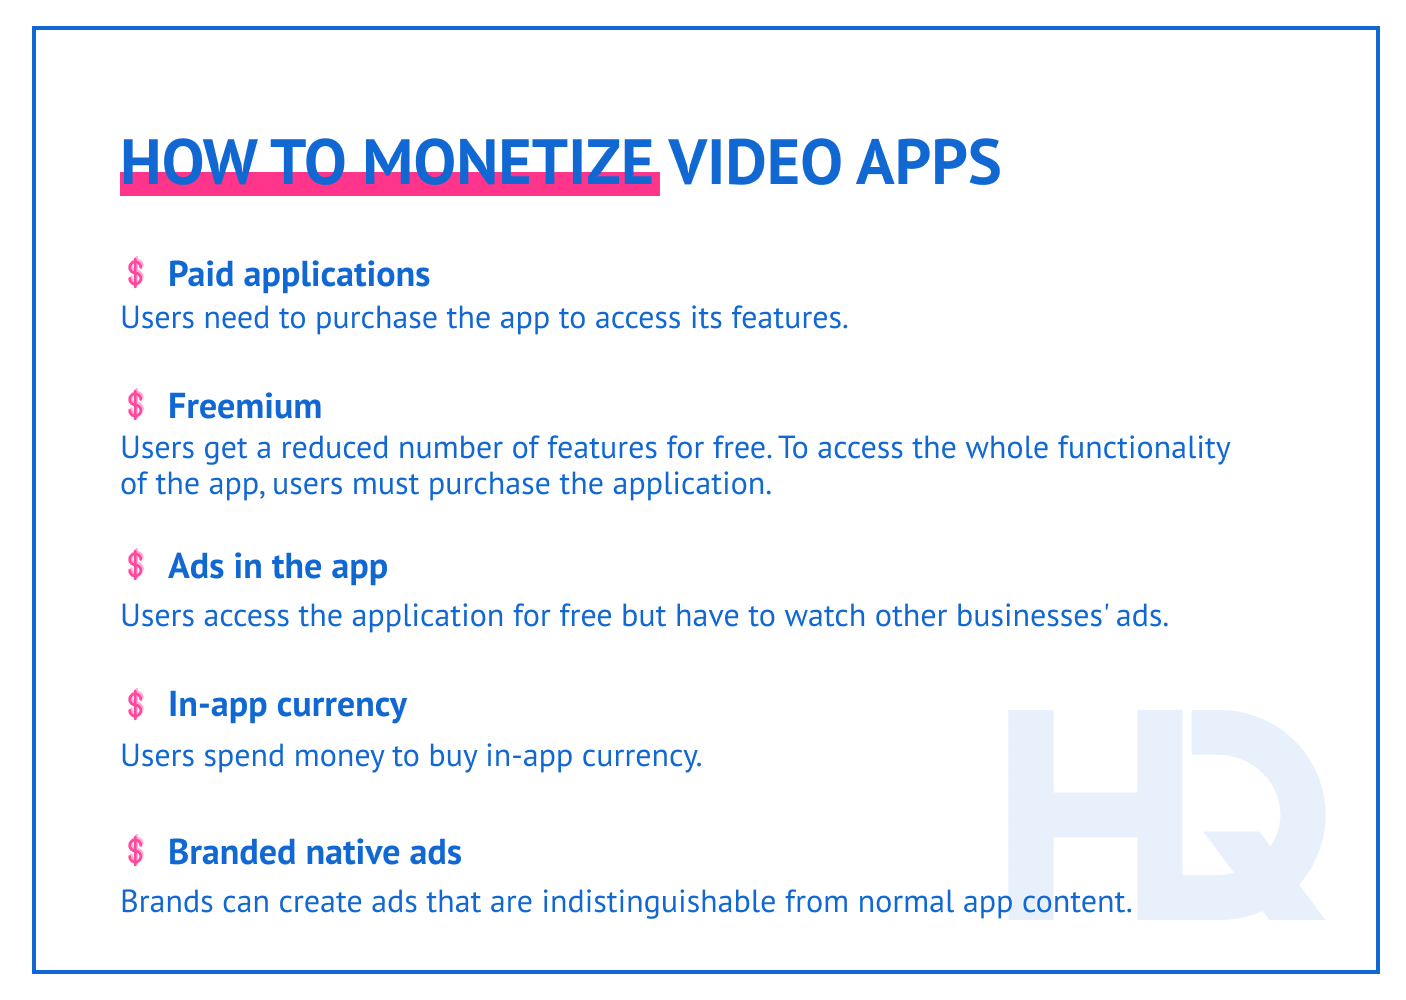 How to monetize video applications.